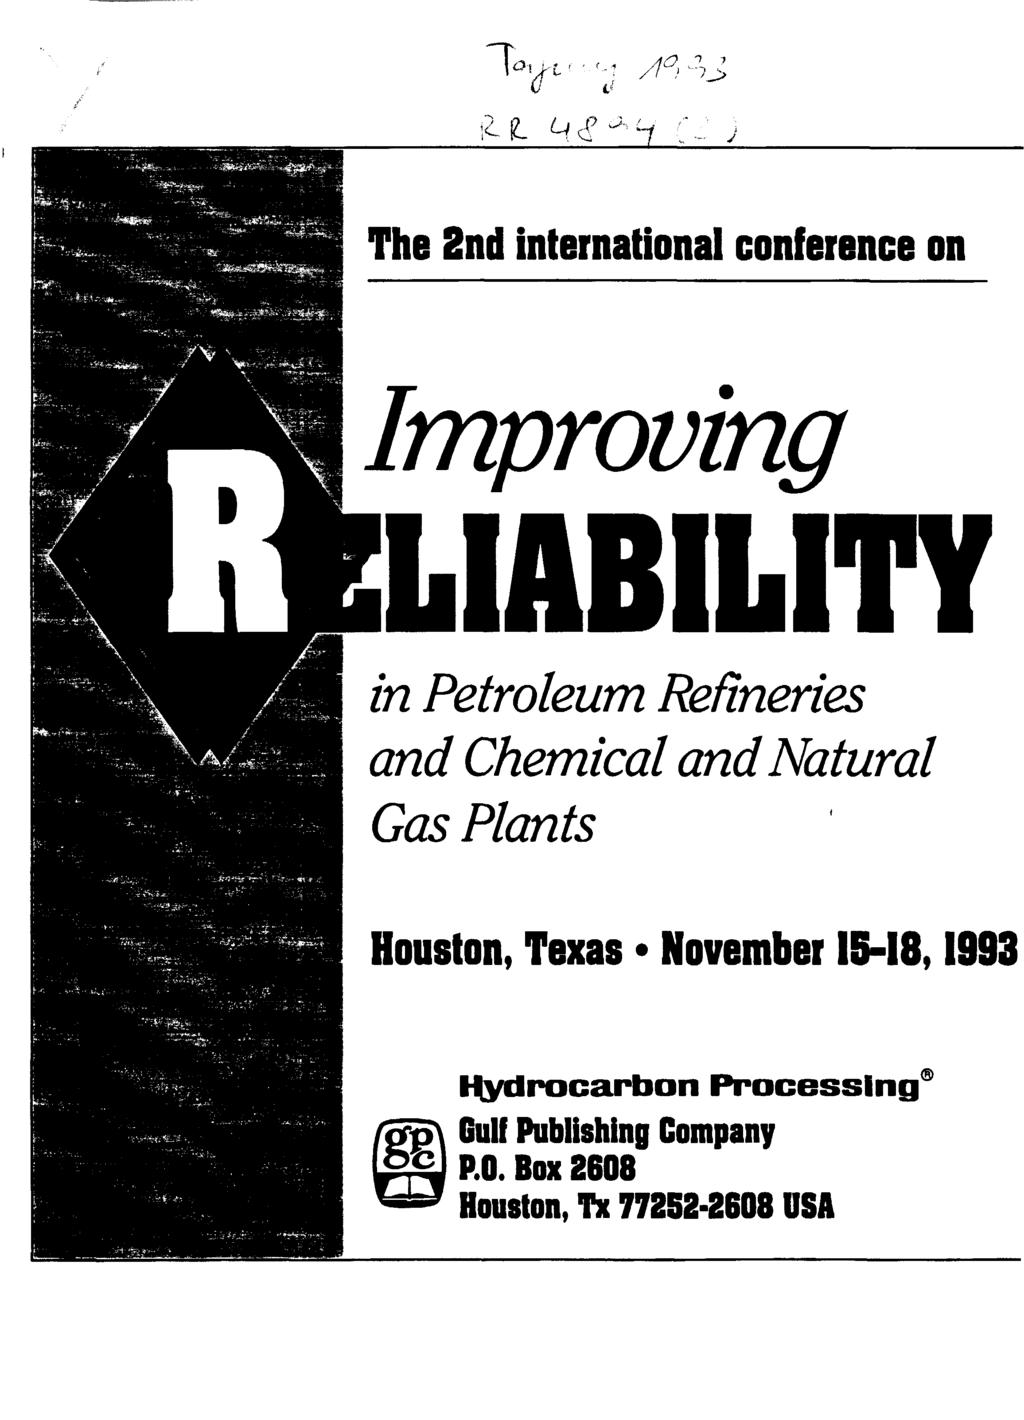 0 The 2nd international conference on Improving LIABILITY in Petroleum Refineries and Chemical and Natural Gas Plants